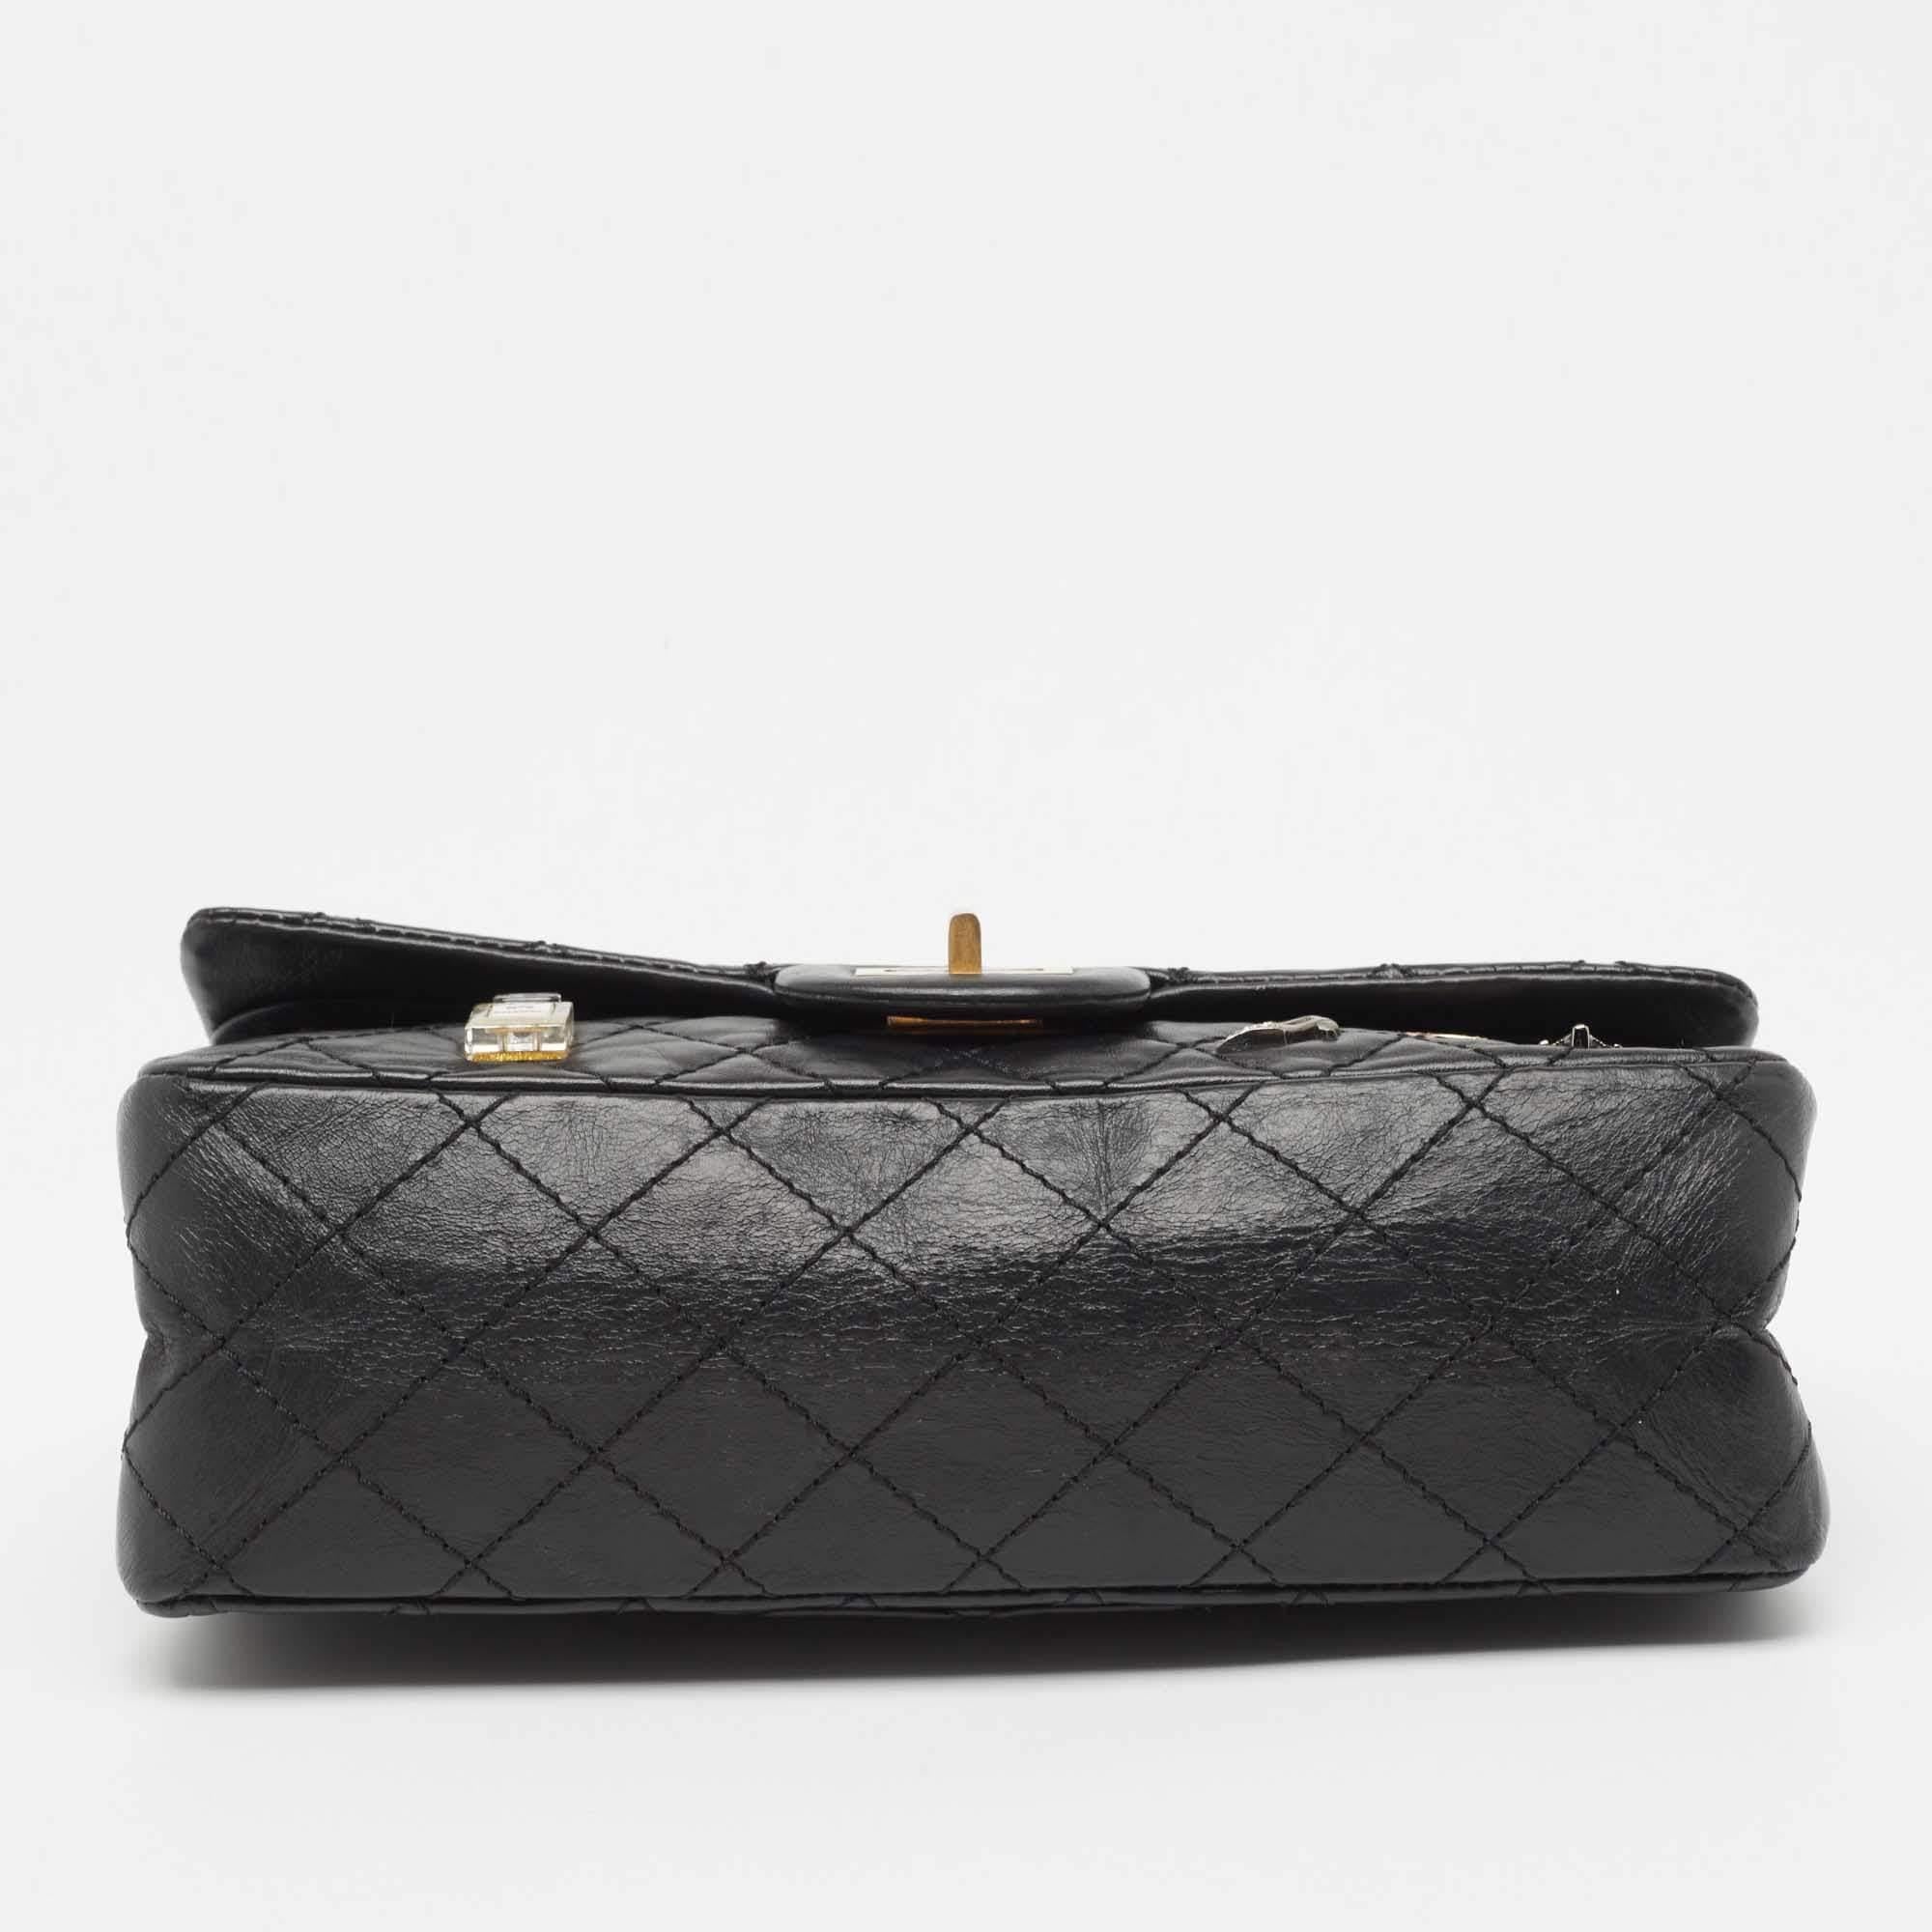 Chanel Black Quilted Aged Leather 225 Lucky Charm Reissue 2.55 Flap Bag 1